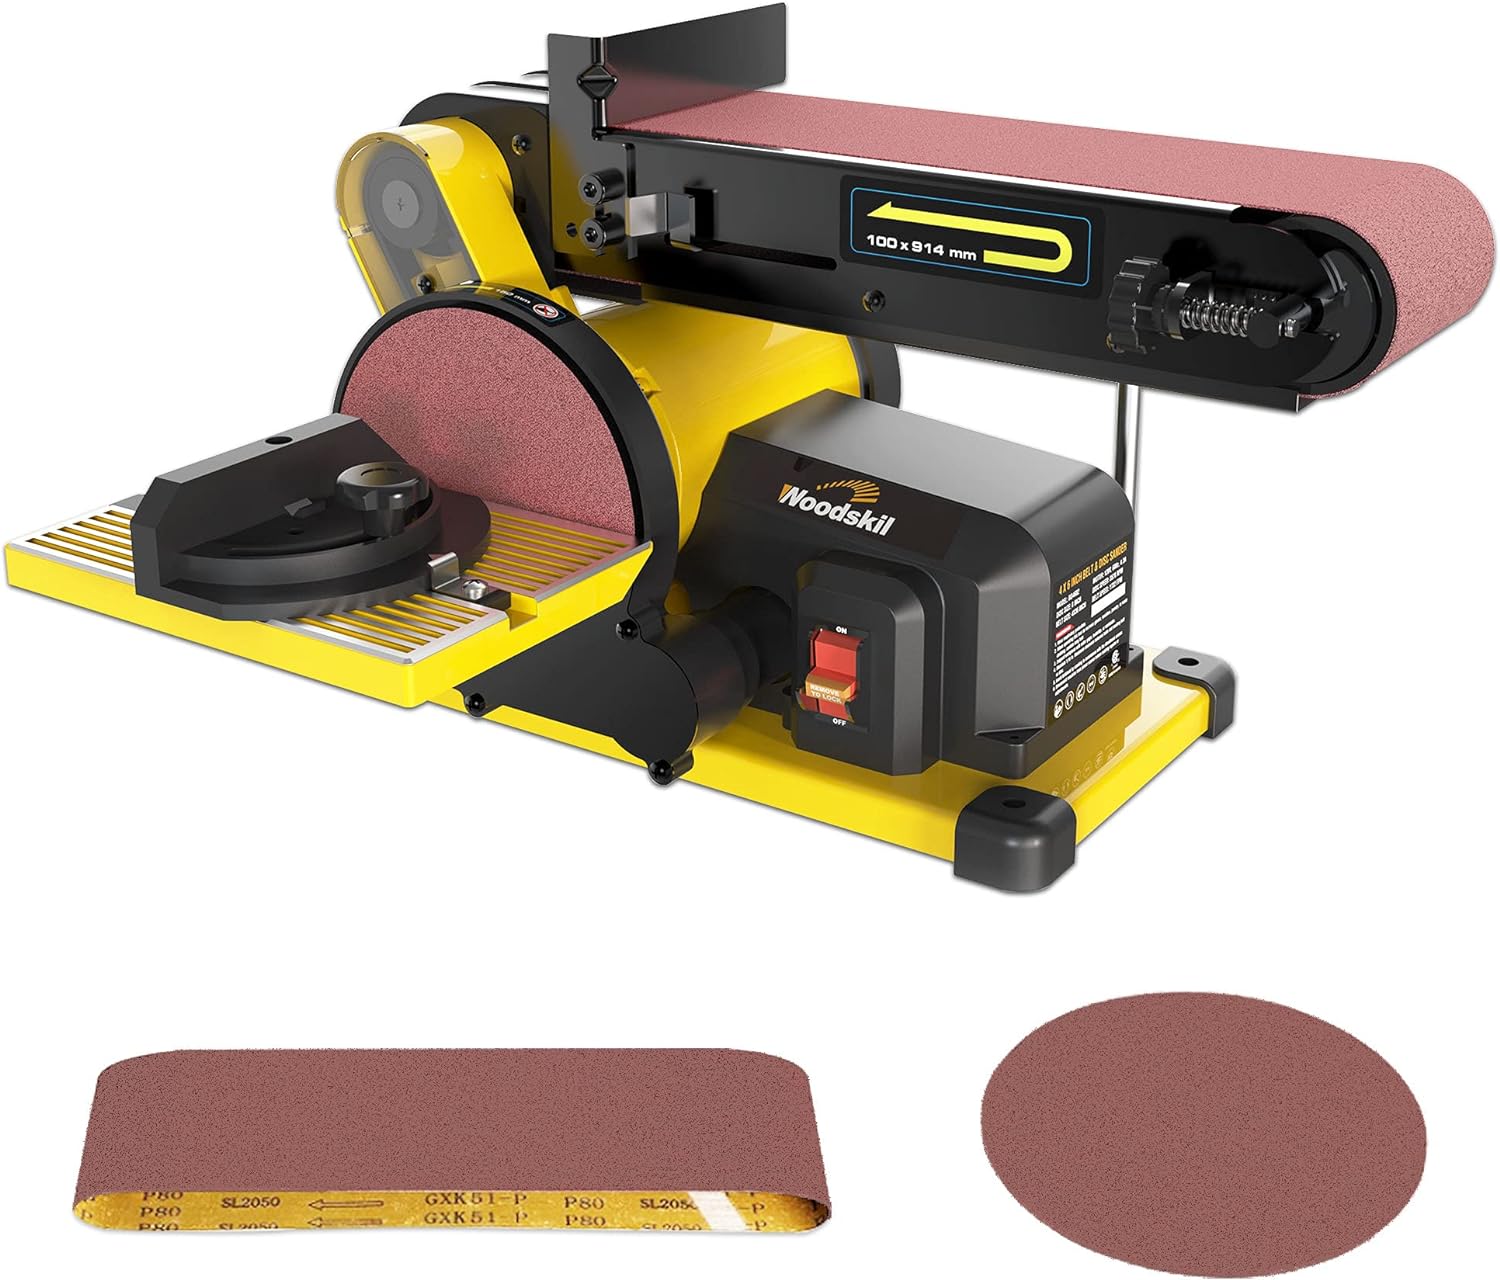 Woodskil Professional 4.3A Belt Sander, 4 x 36 in. Belt  6 in. Disc Sander with 3/4HP Low Noise Induction Brushless Motor, Double Dust Exhaust Port, Steel Base, 2Pcs Sandpapers Included